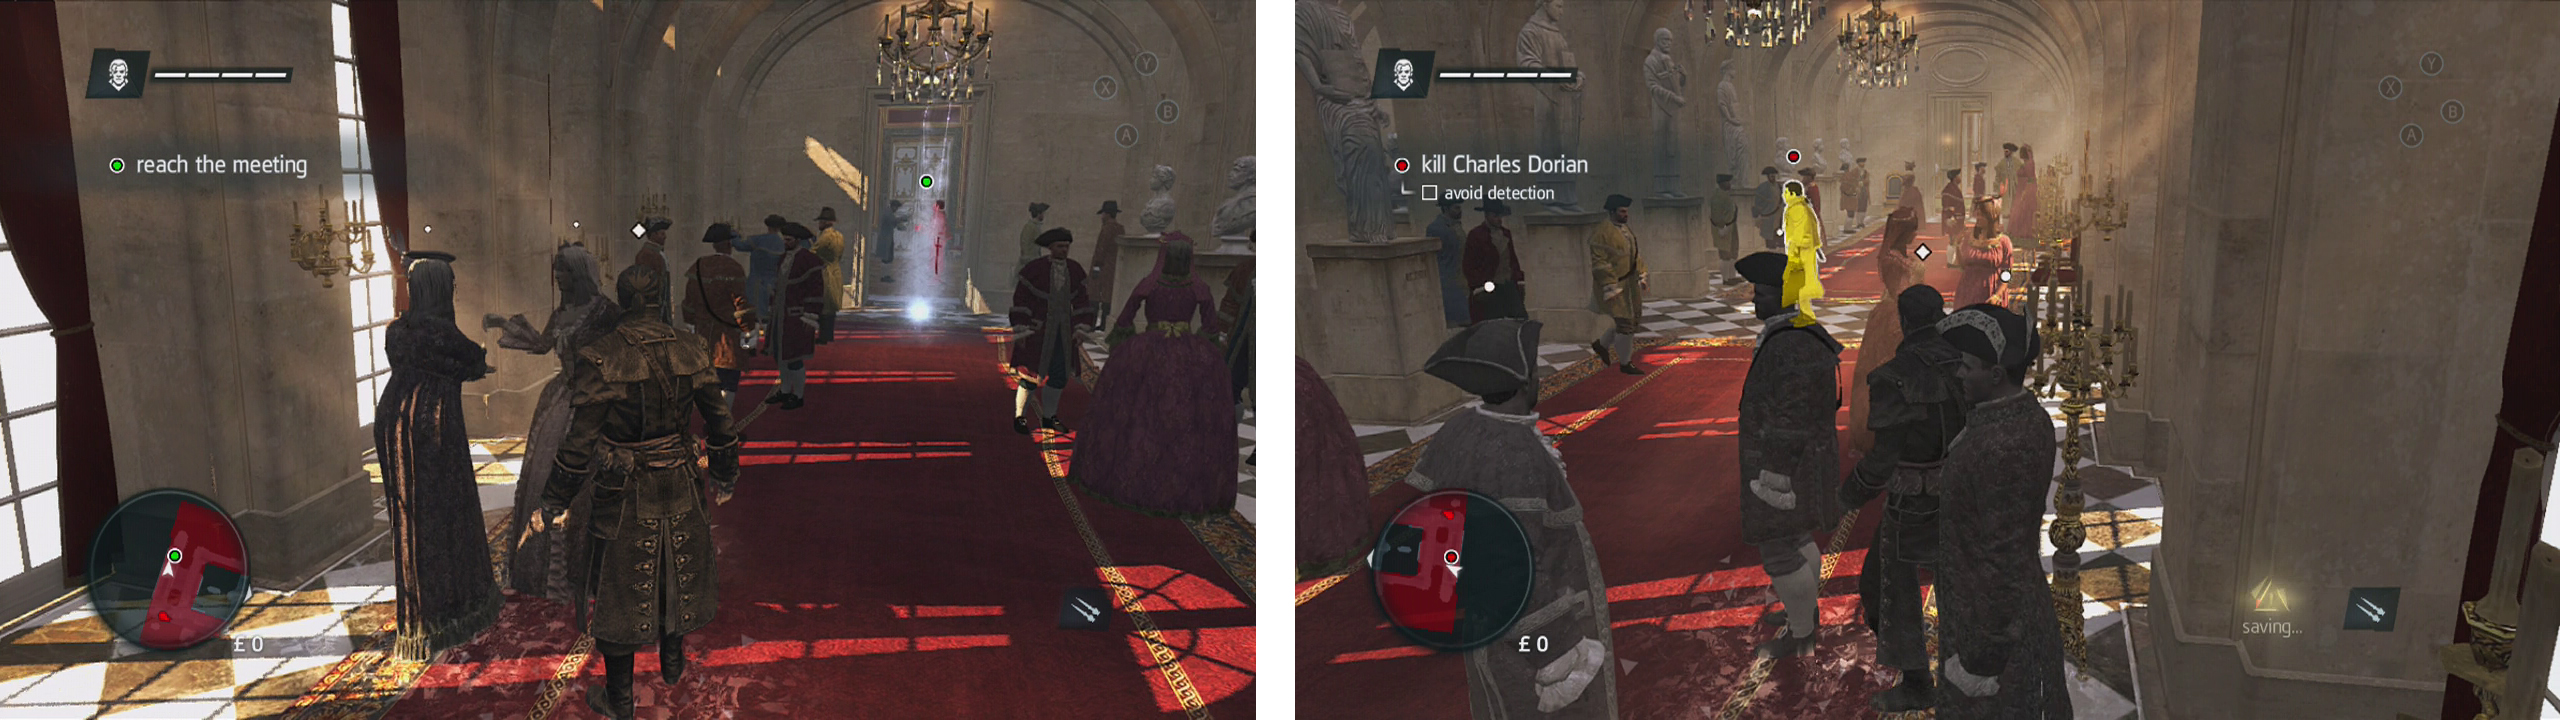 Go to the objective marker at the end of the hallway (left). Then use the crowds to sneak up and kill the target (right).